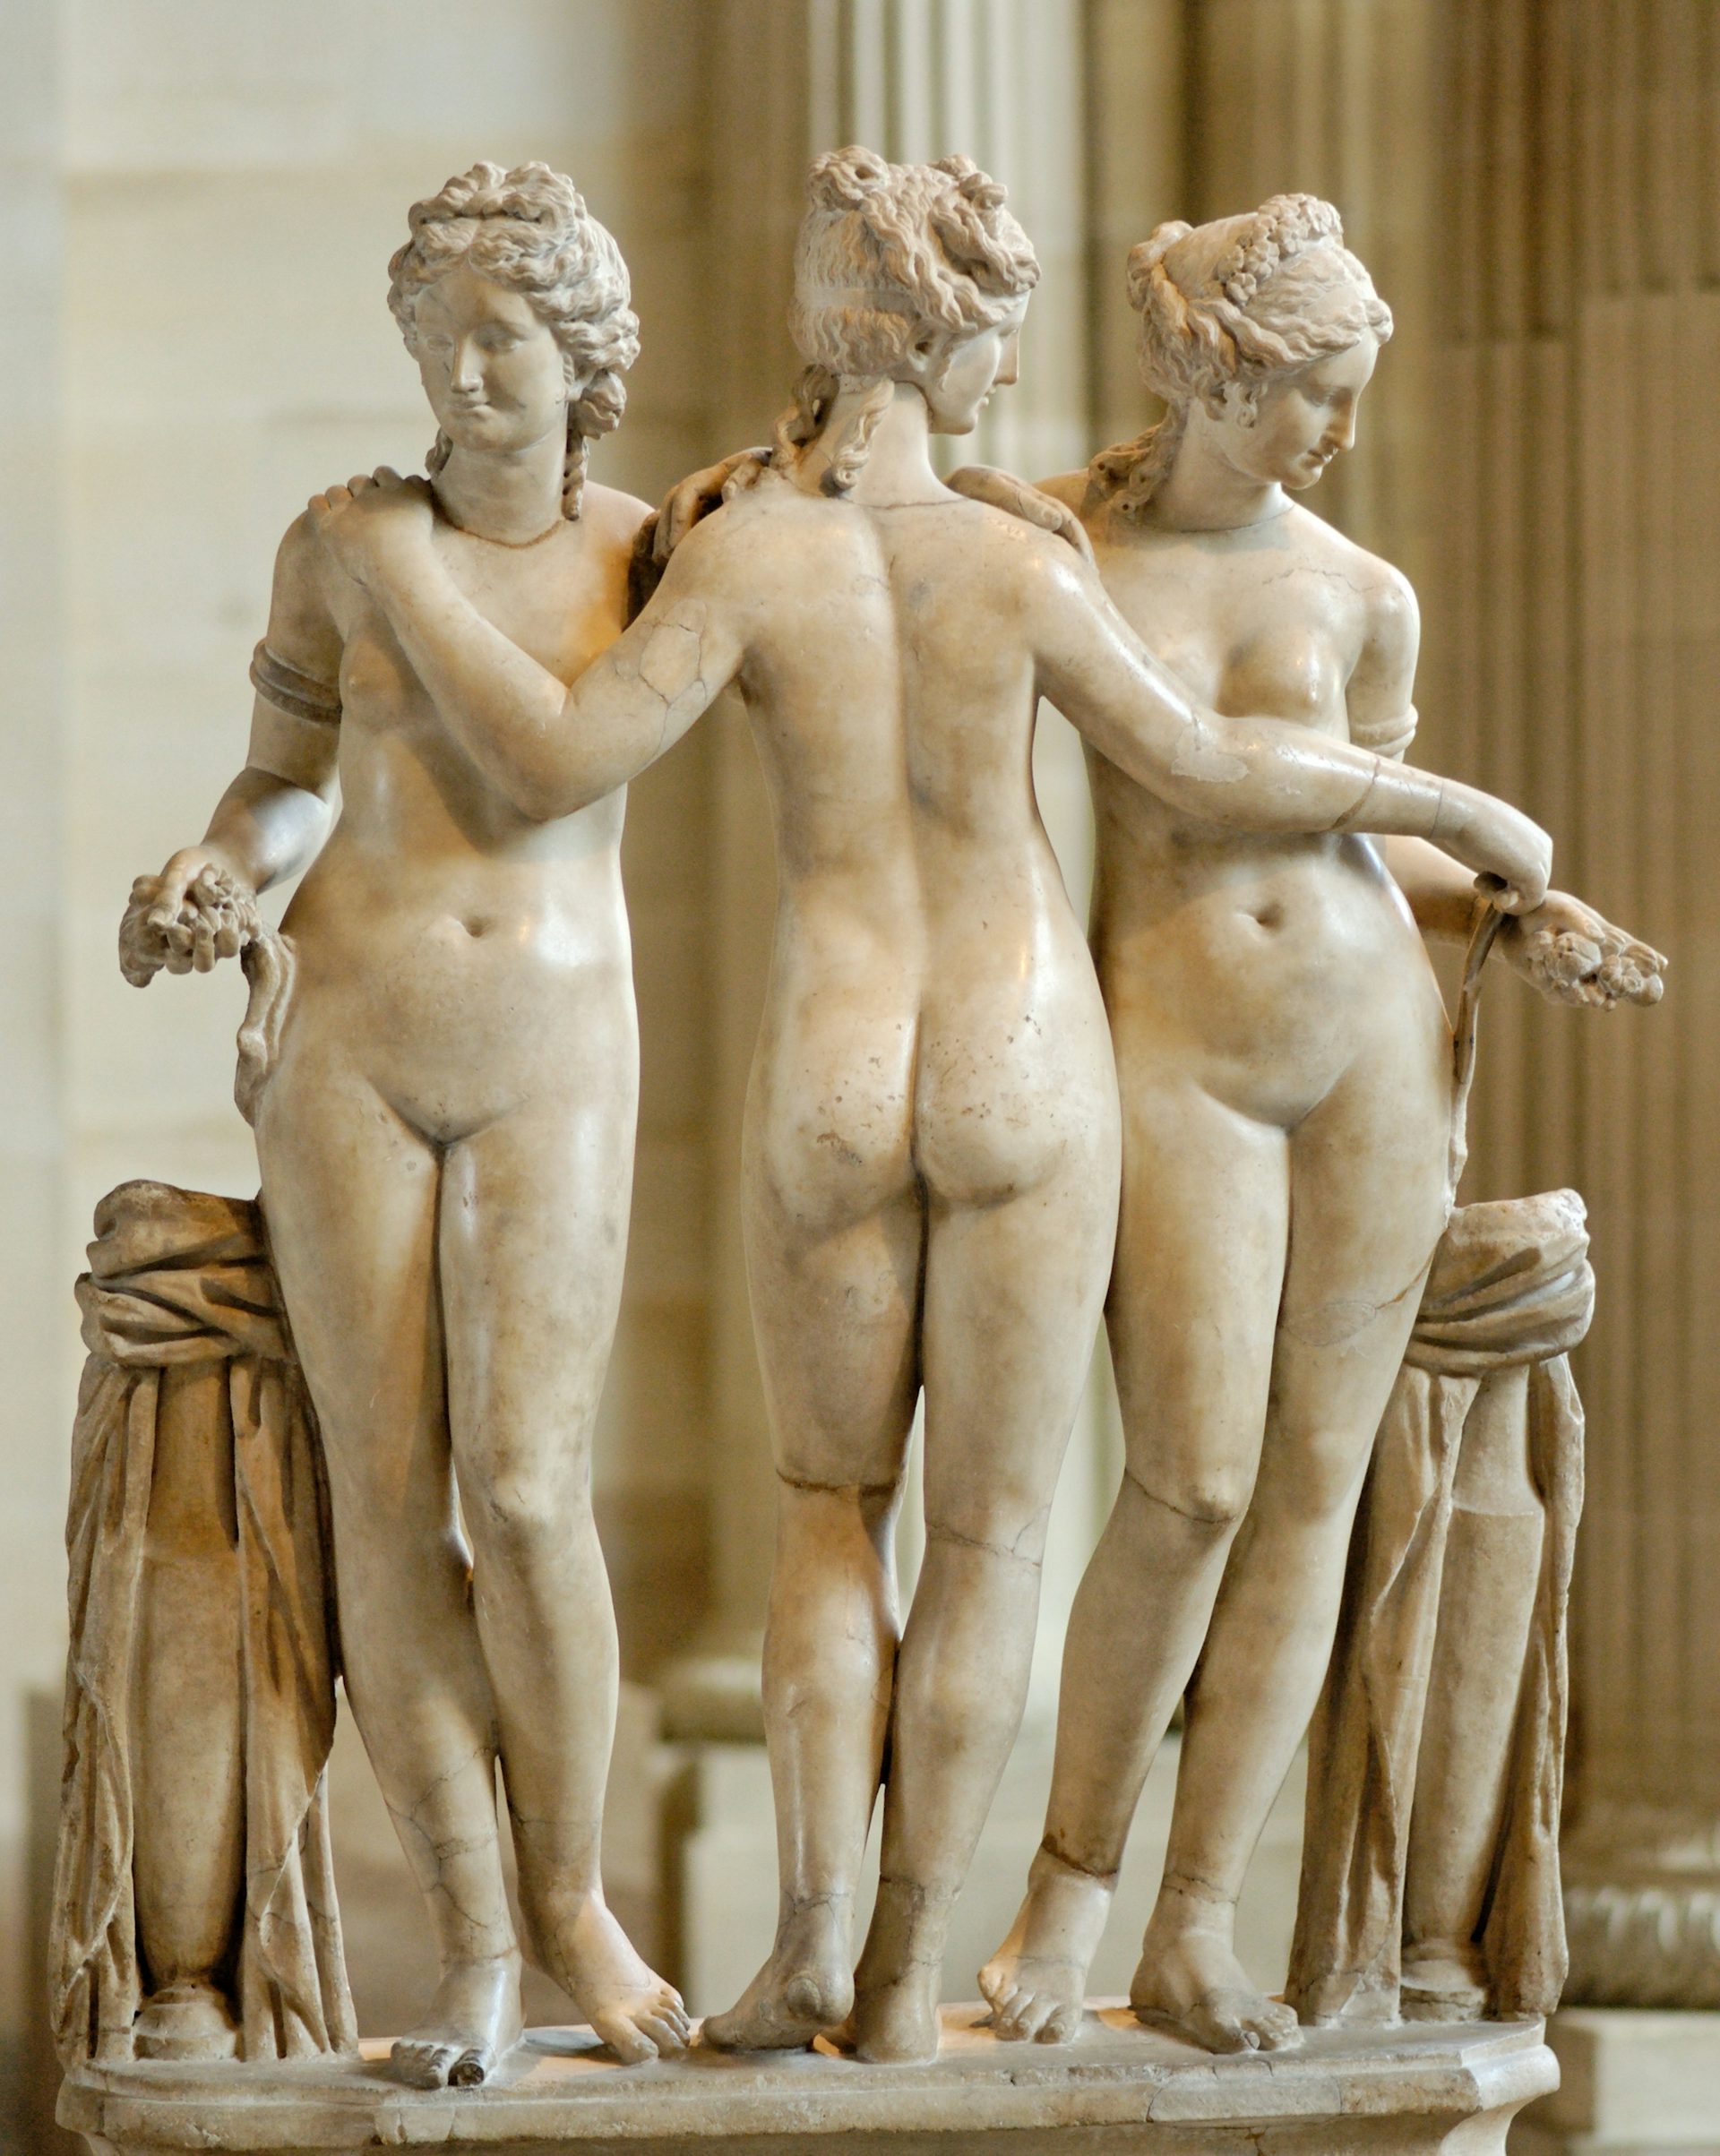 Roman Imperial statue of the three Graces